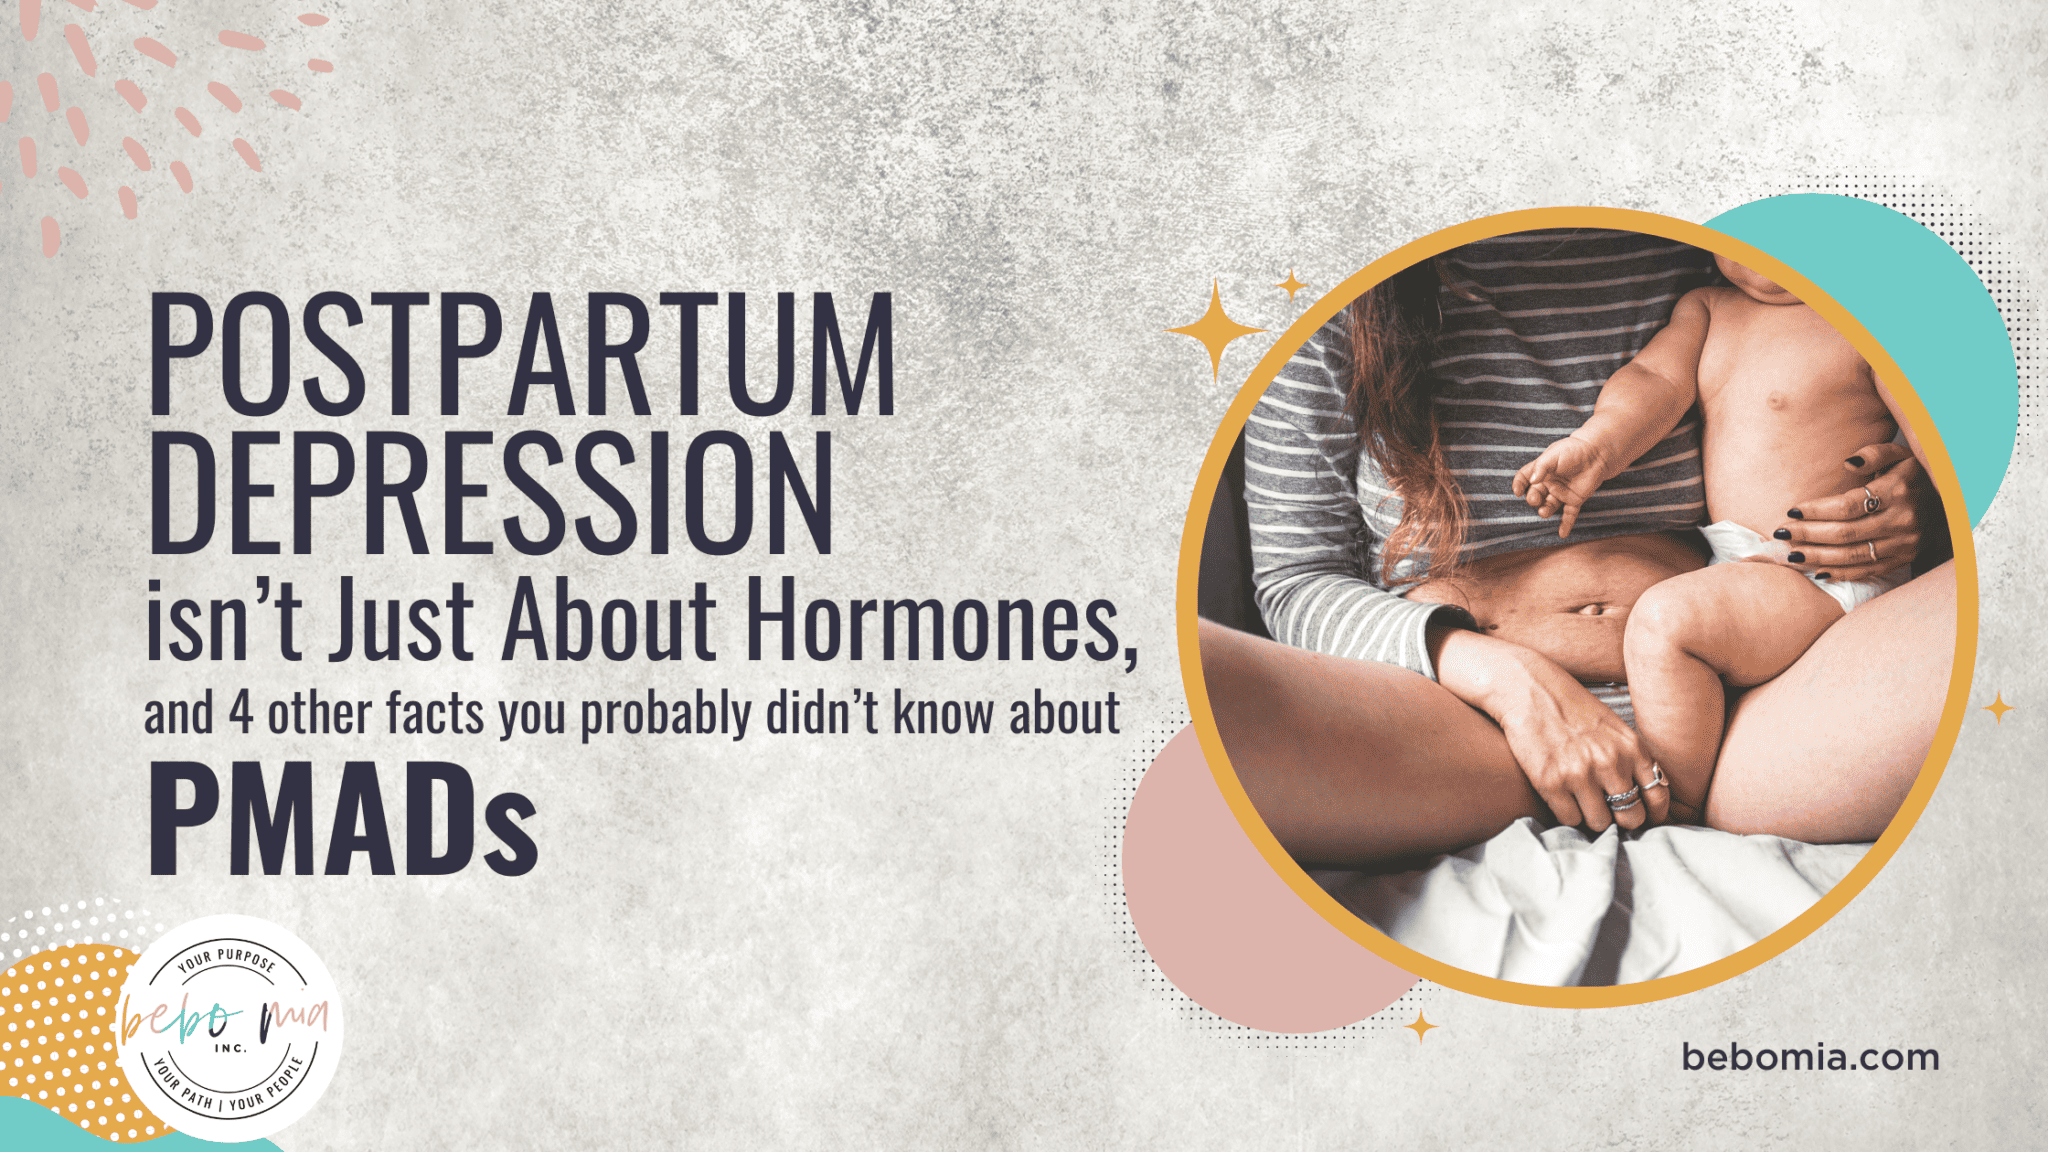 Postpartum Depression isn’t Just About Hormones, and 4 other facts you probably didn’t know about PMADS